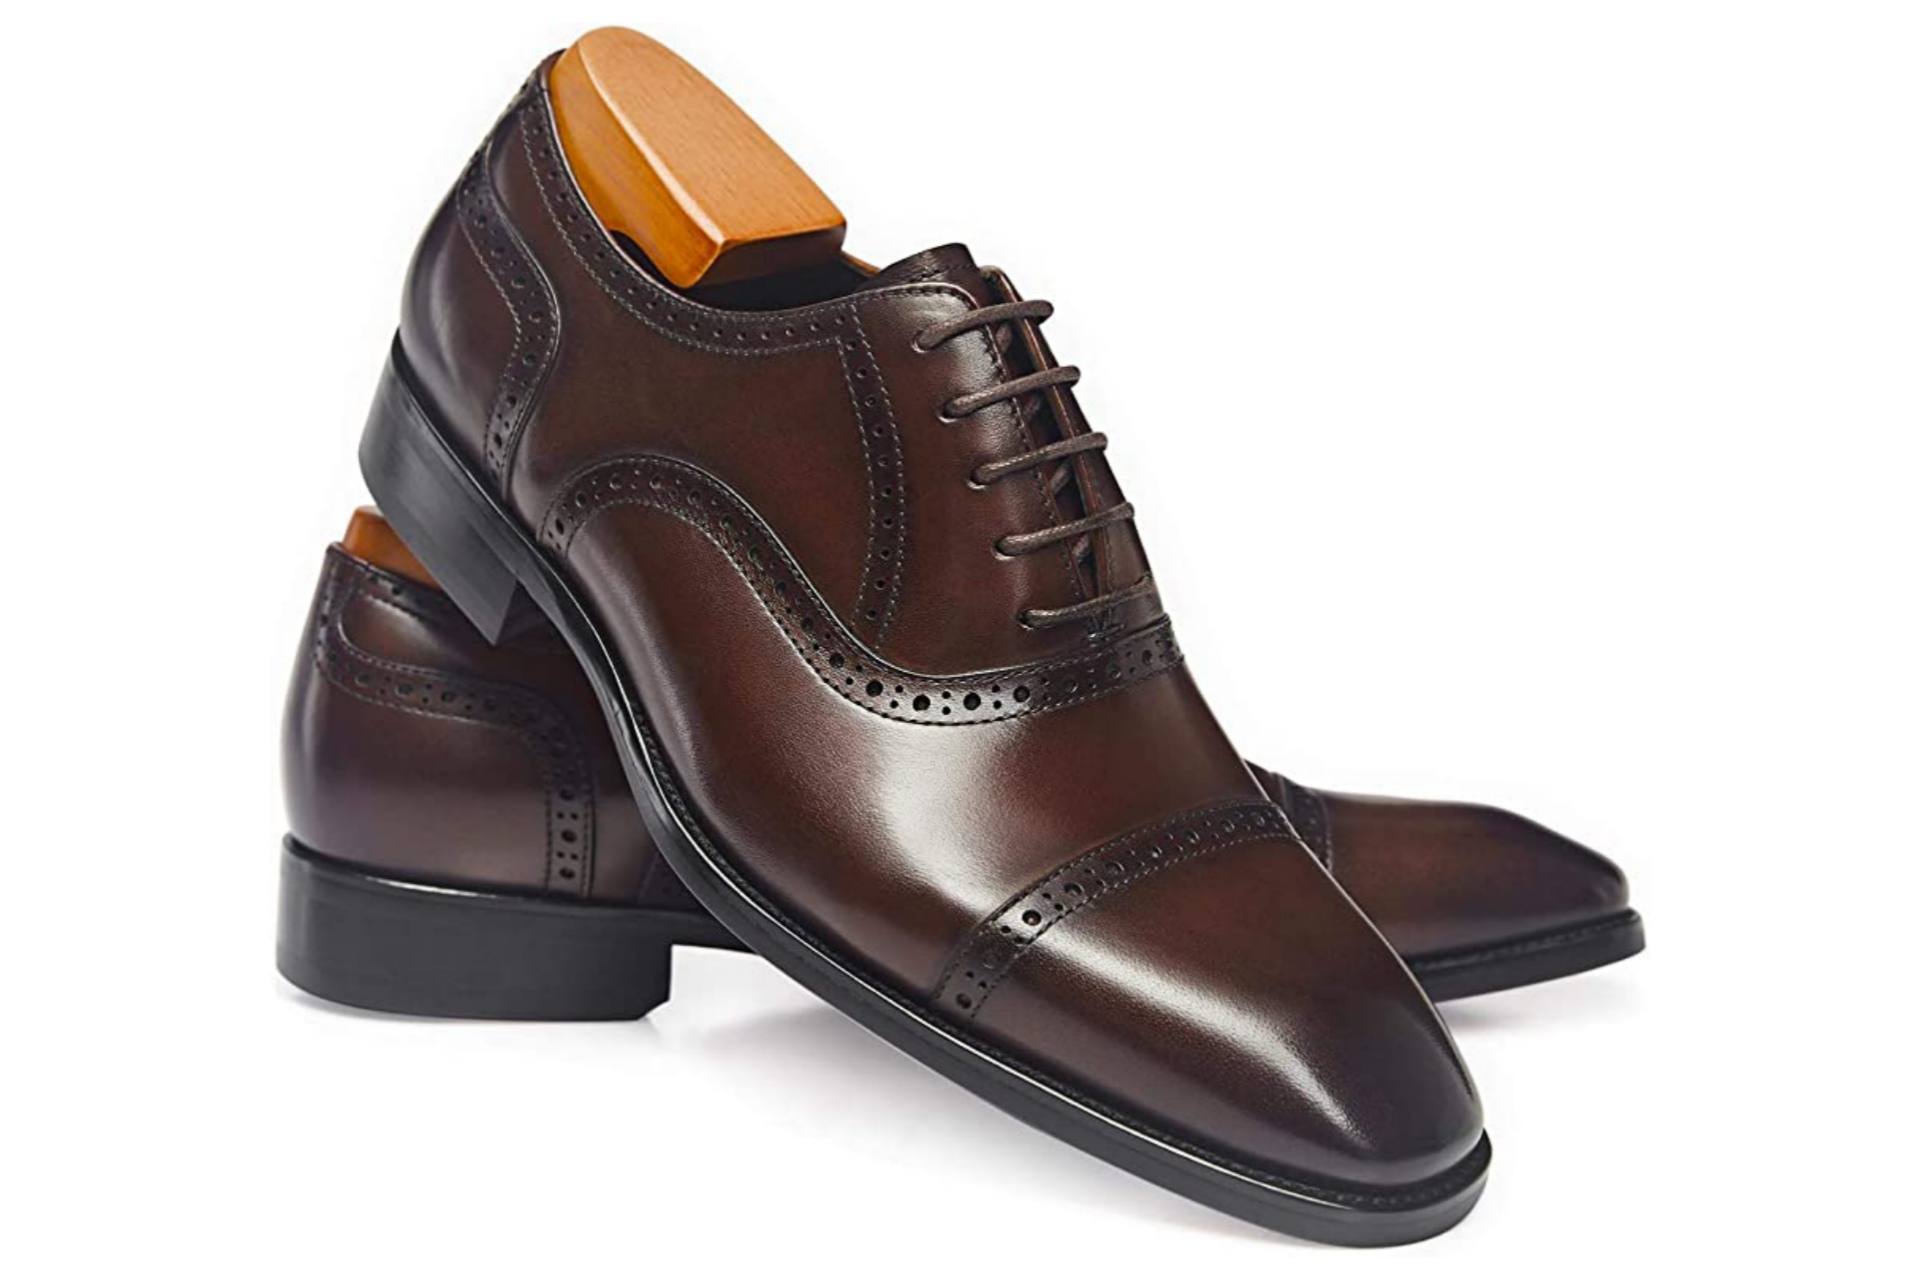 Best office Oxford shoes for Men